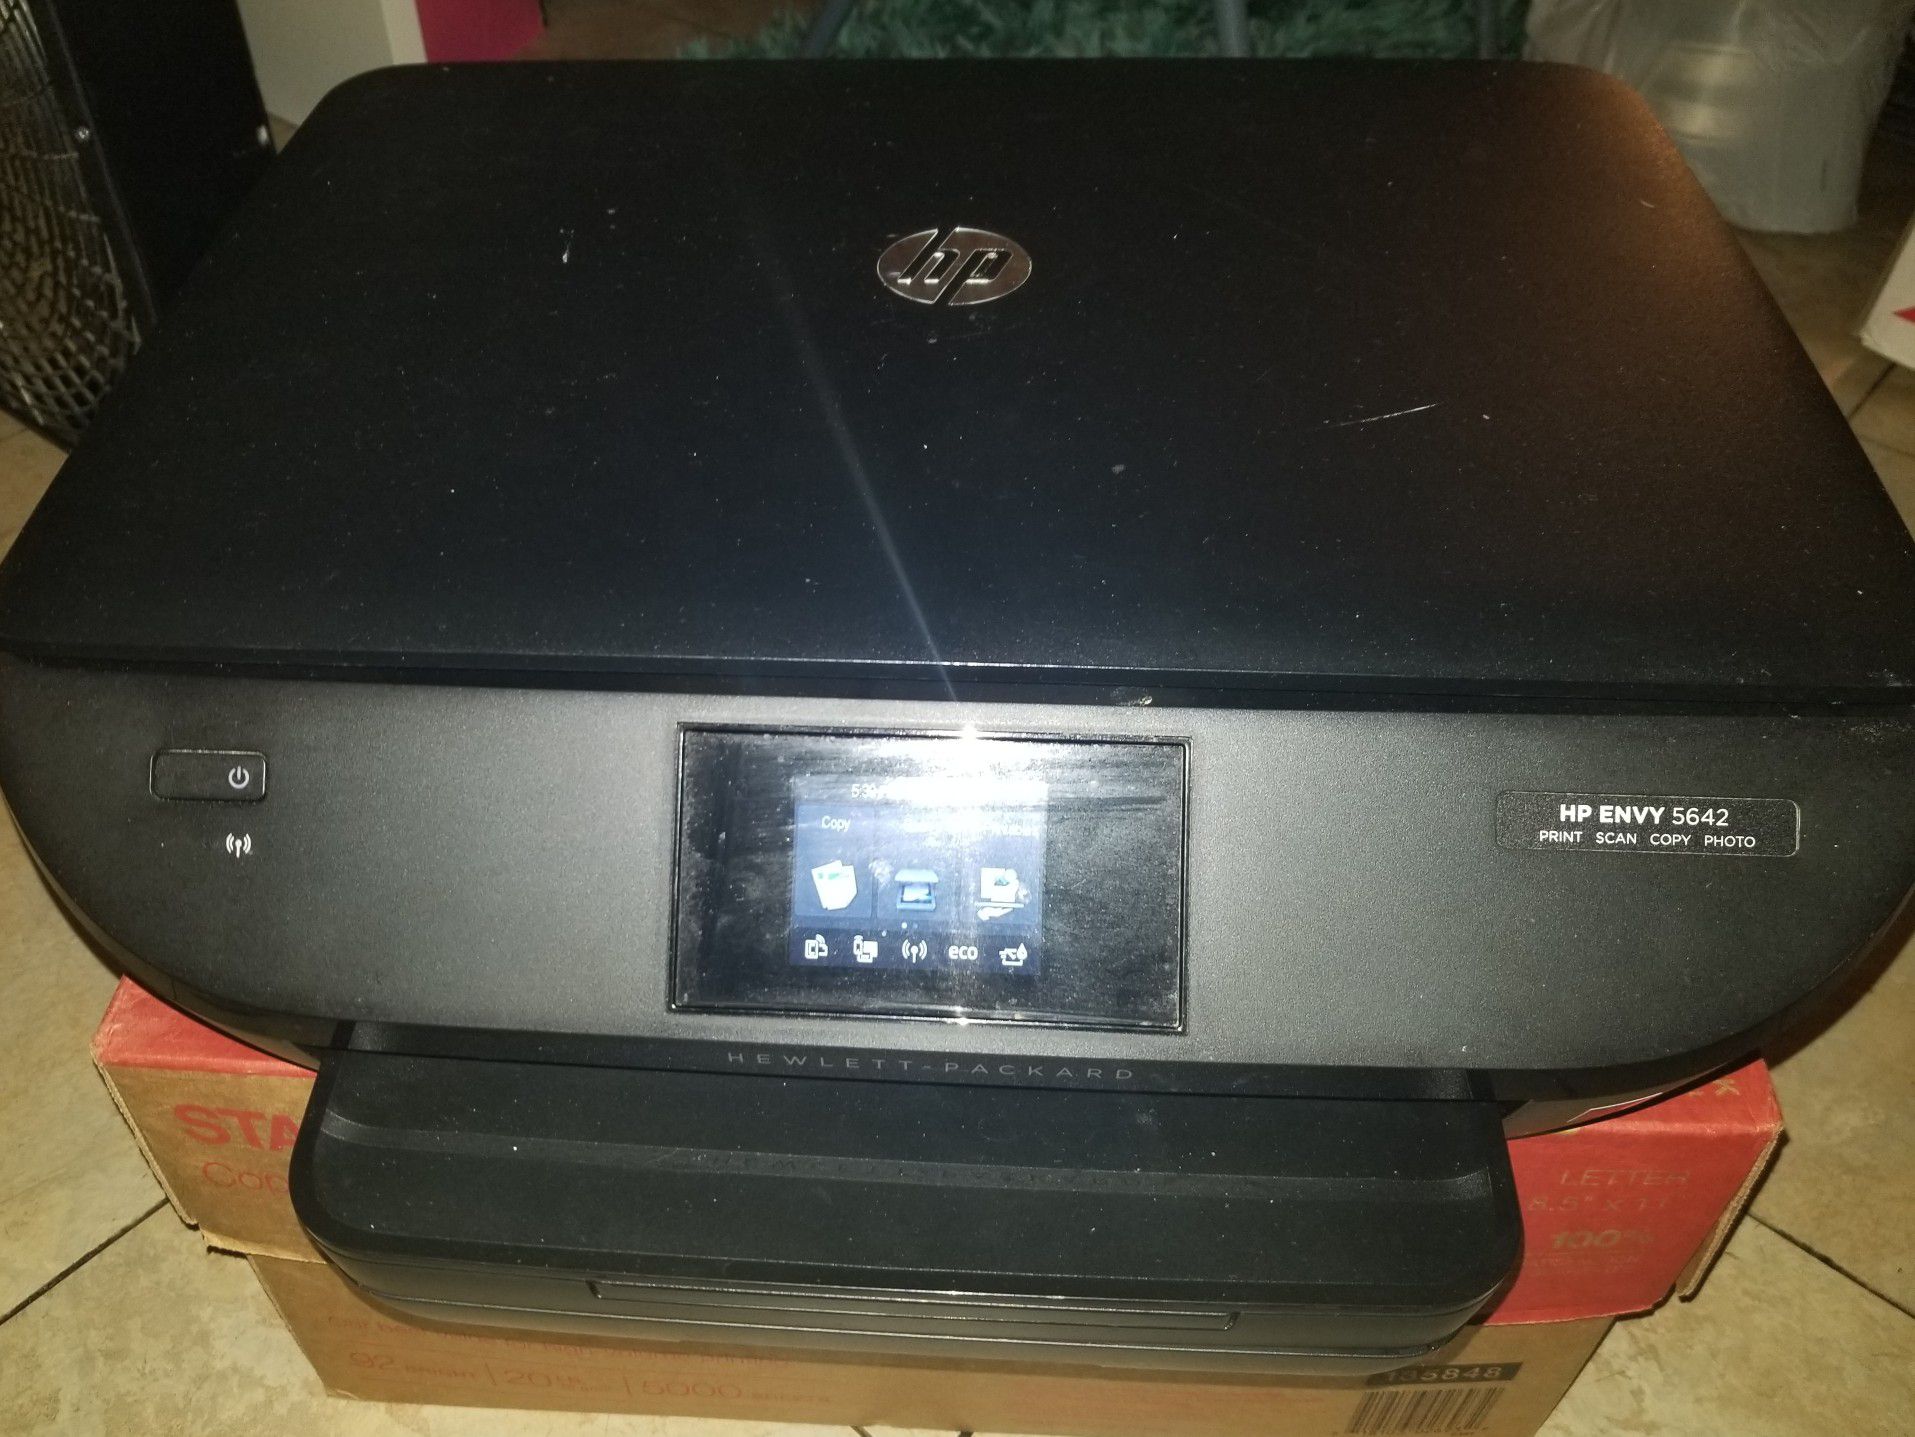 HP ENVY 5642 ALL-IN-ONE PRINTER